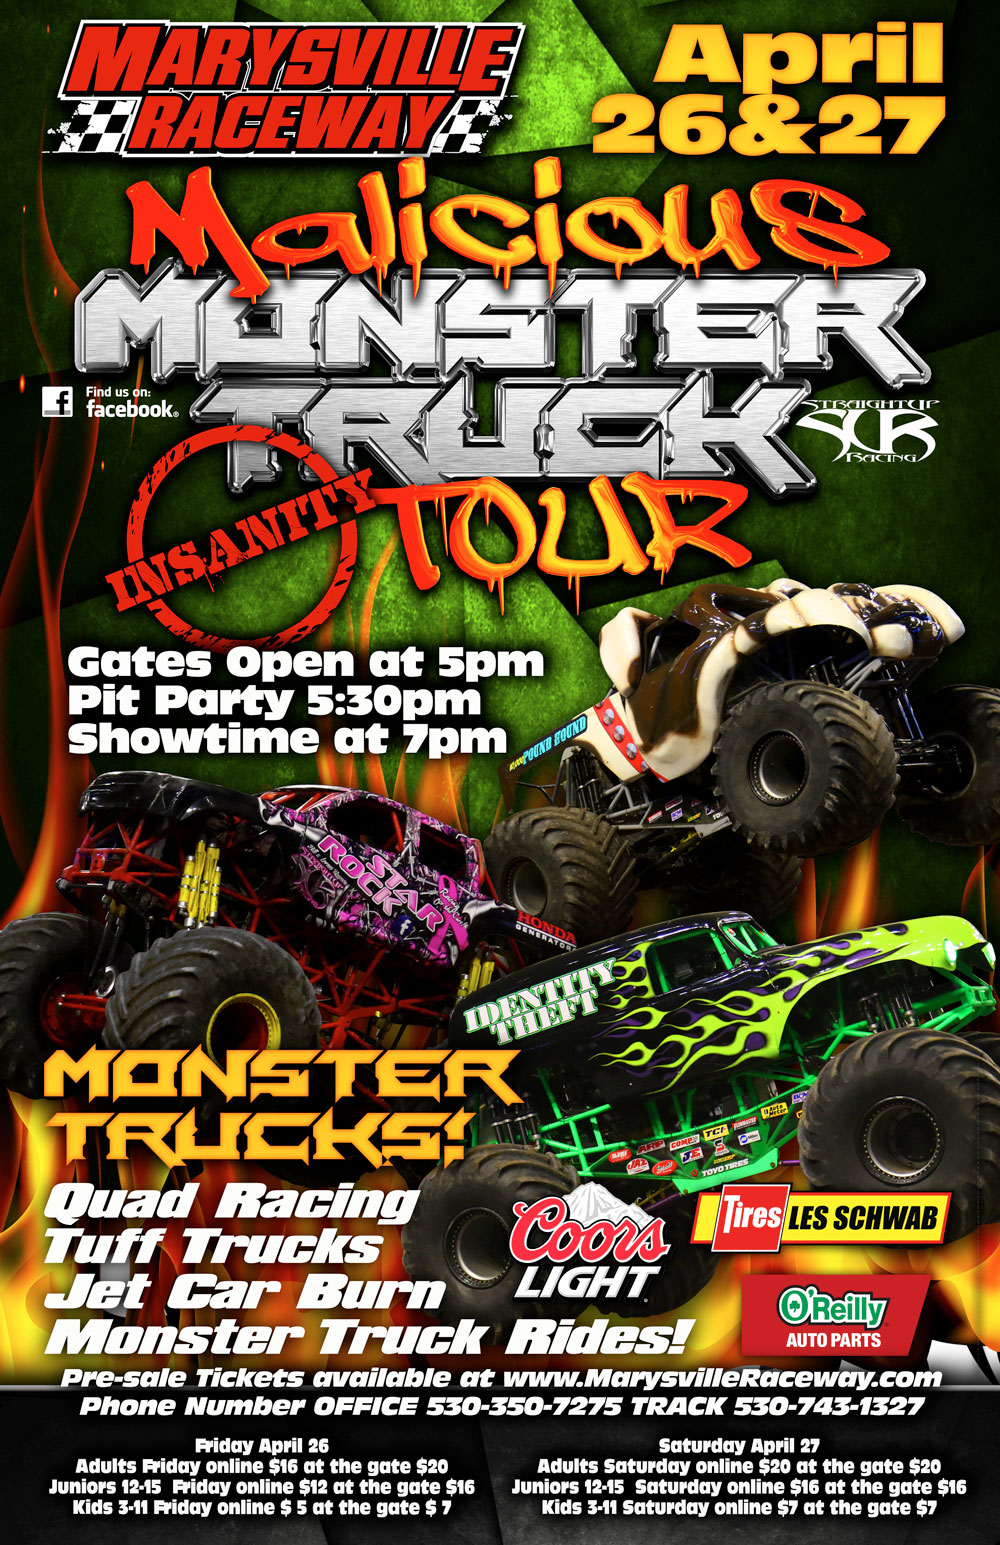 malicious monster truck tour tickets